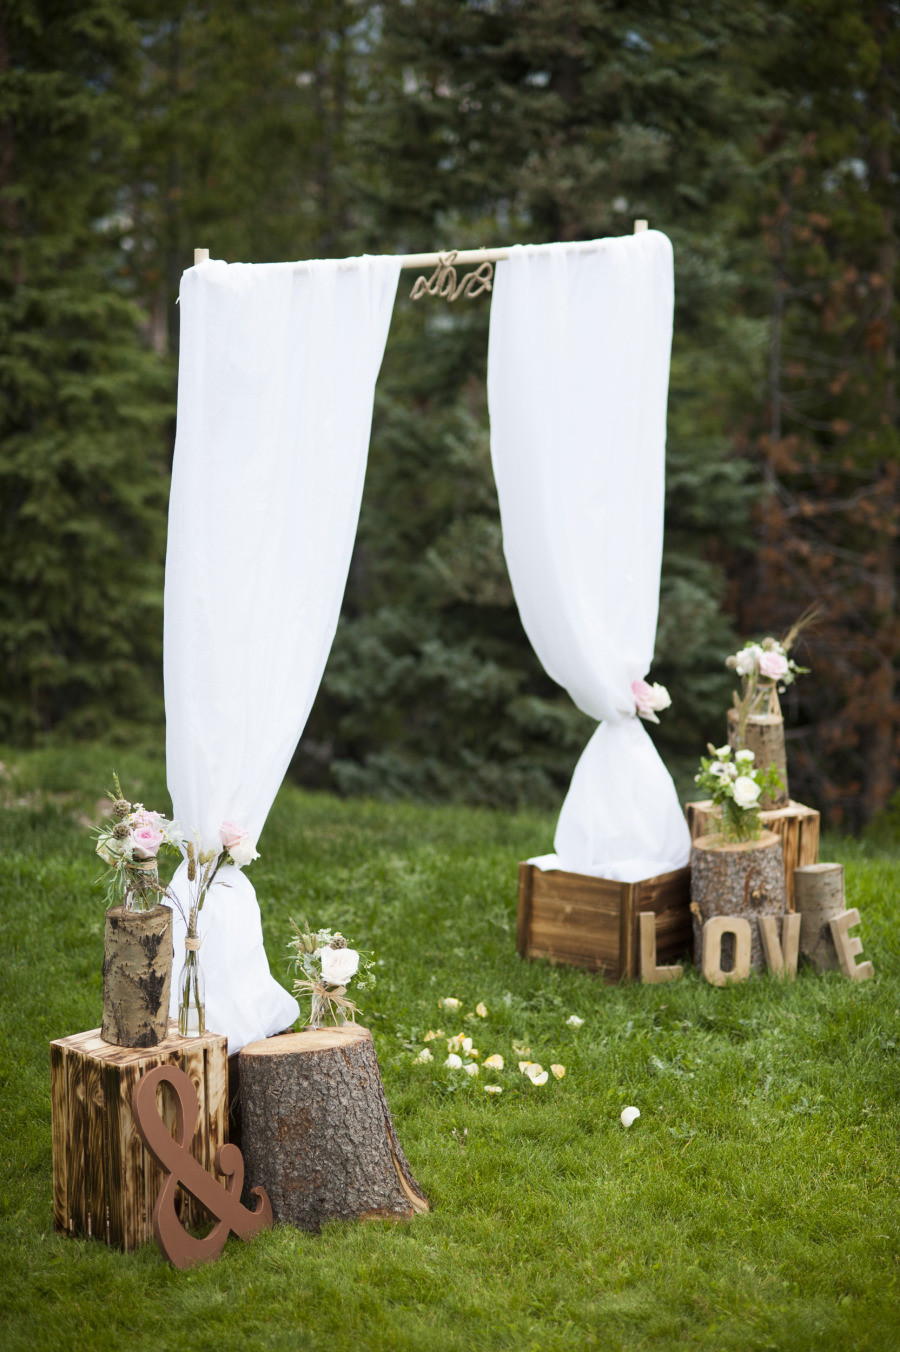 Wedding Altar Decorations
 Say “I Do” to These Fab 51 Rustic Wedding Decorations